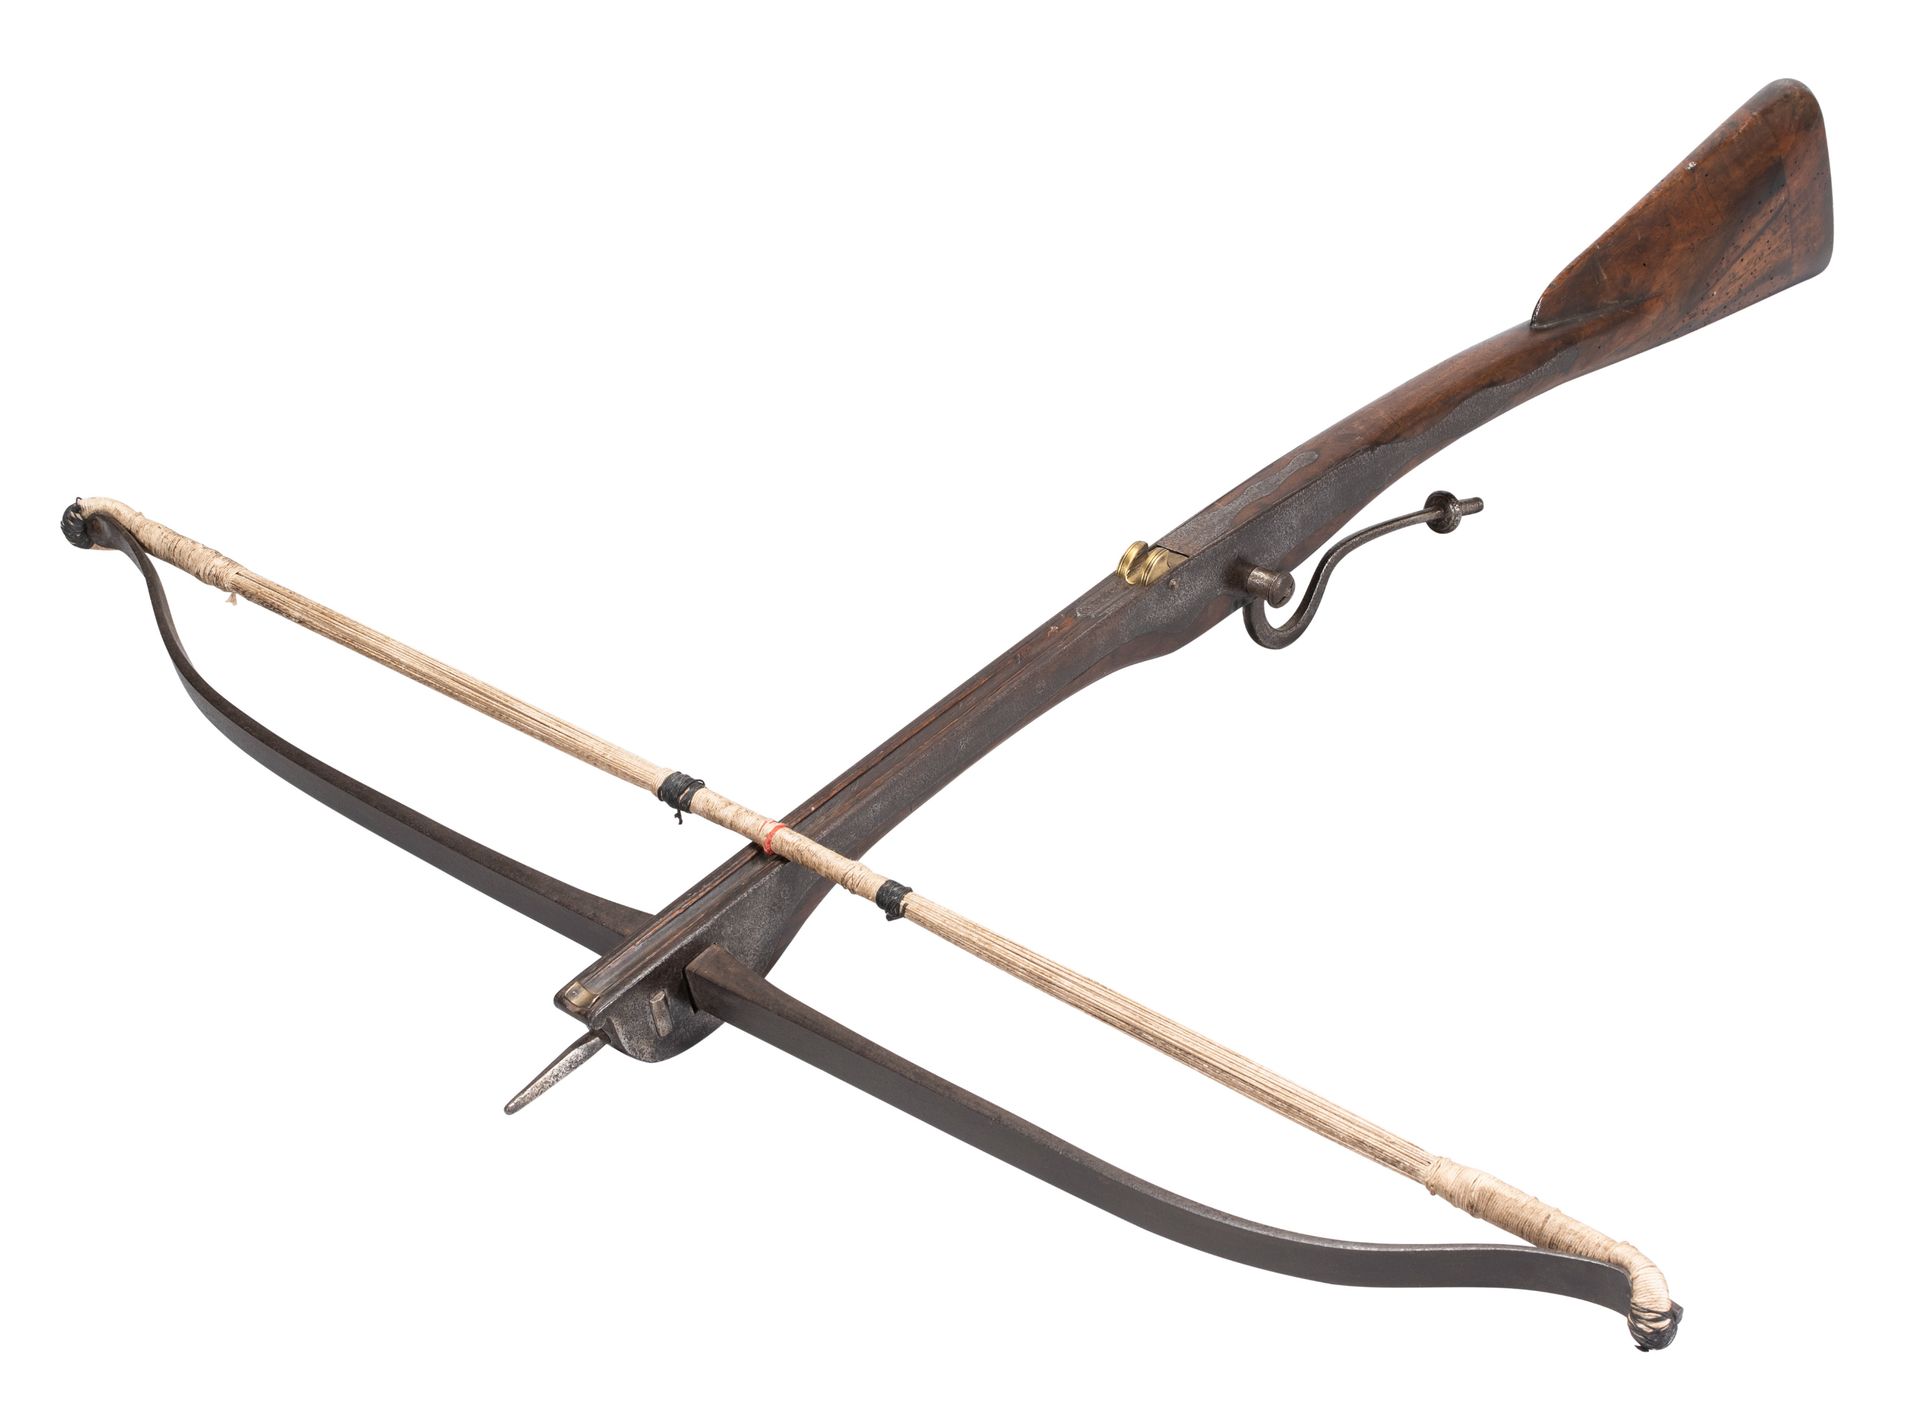 A LARGE NORTH EUROPEAN CROSSBOW, EARLY 19TH CENTURY, PROBABLY FLEMISH 一个大型的北欧十字弓&hellip;